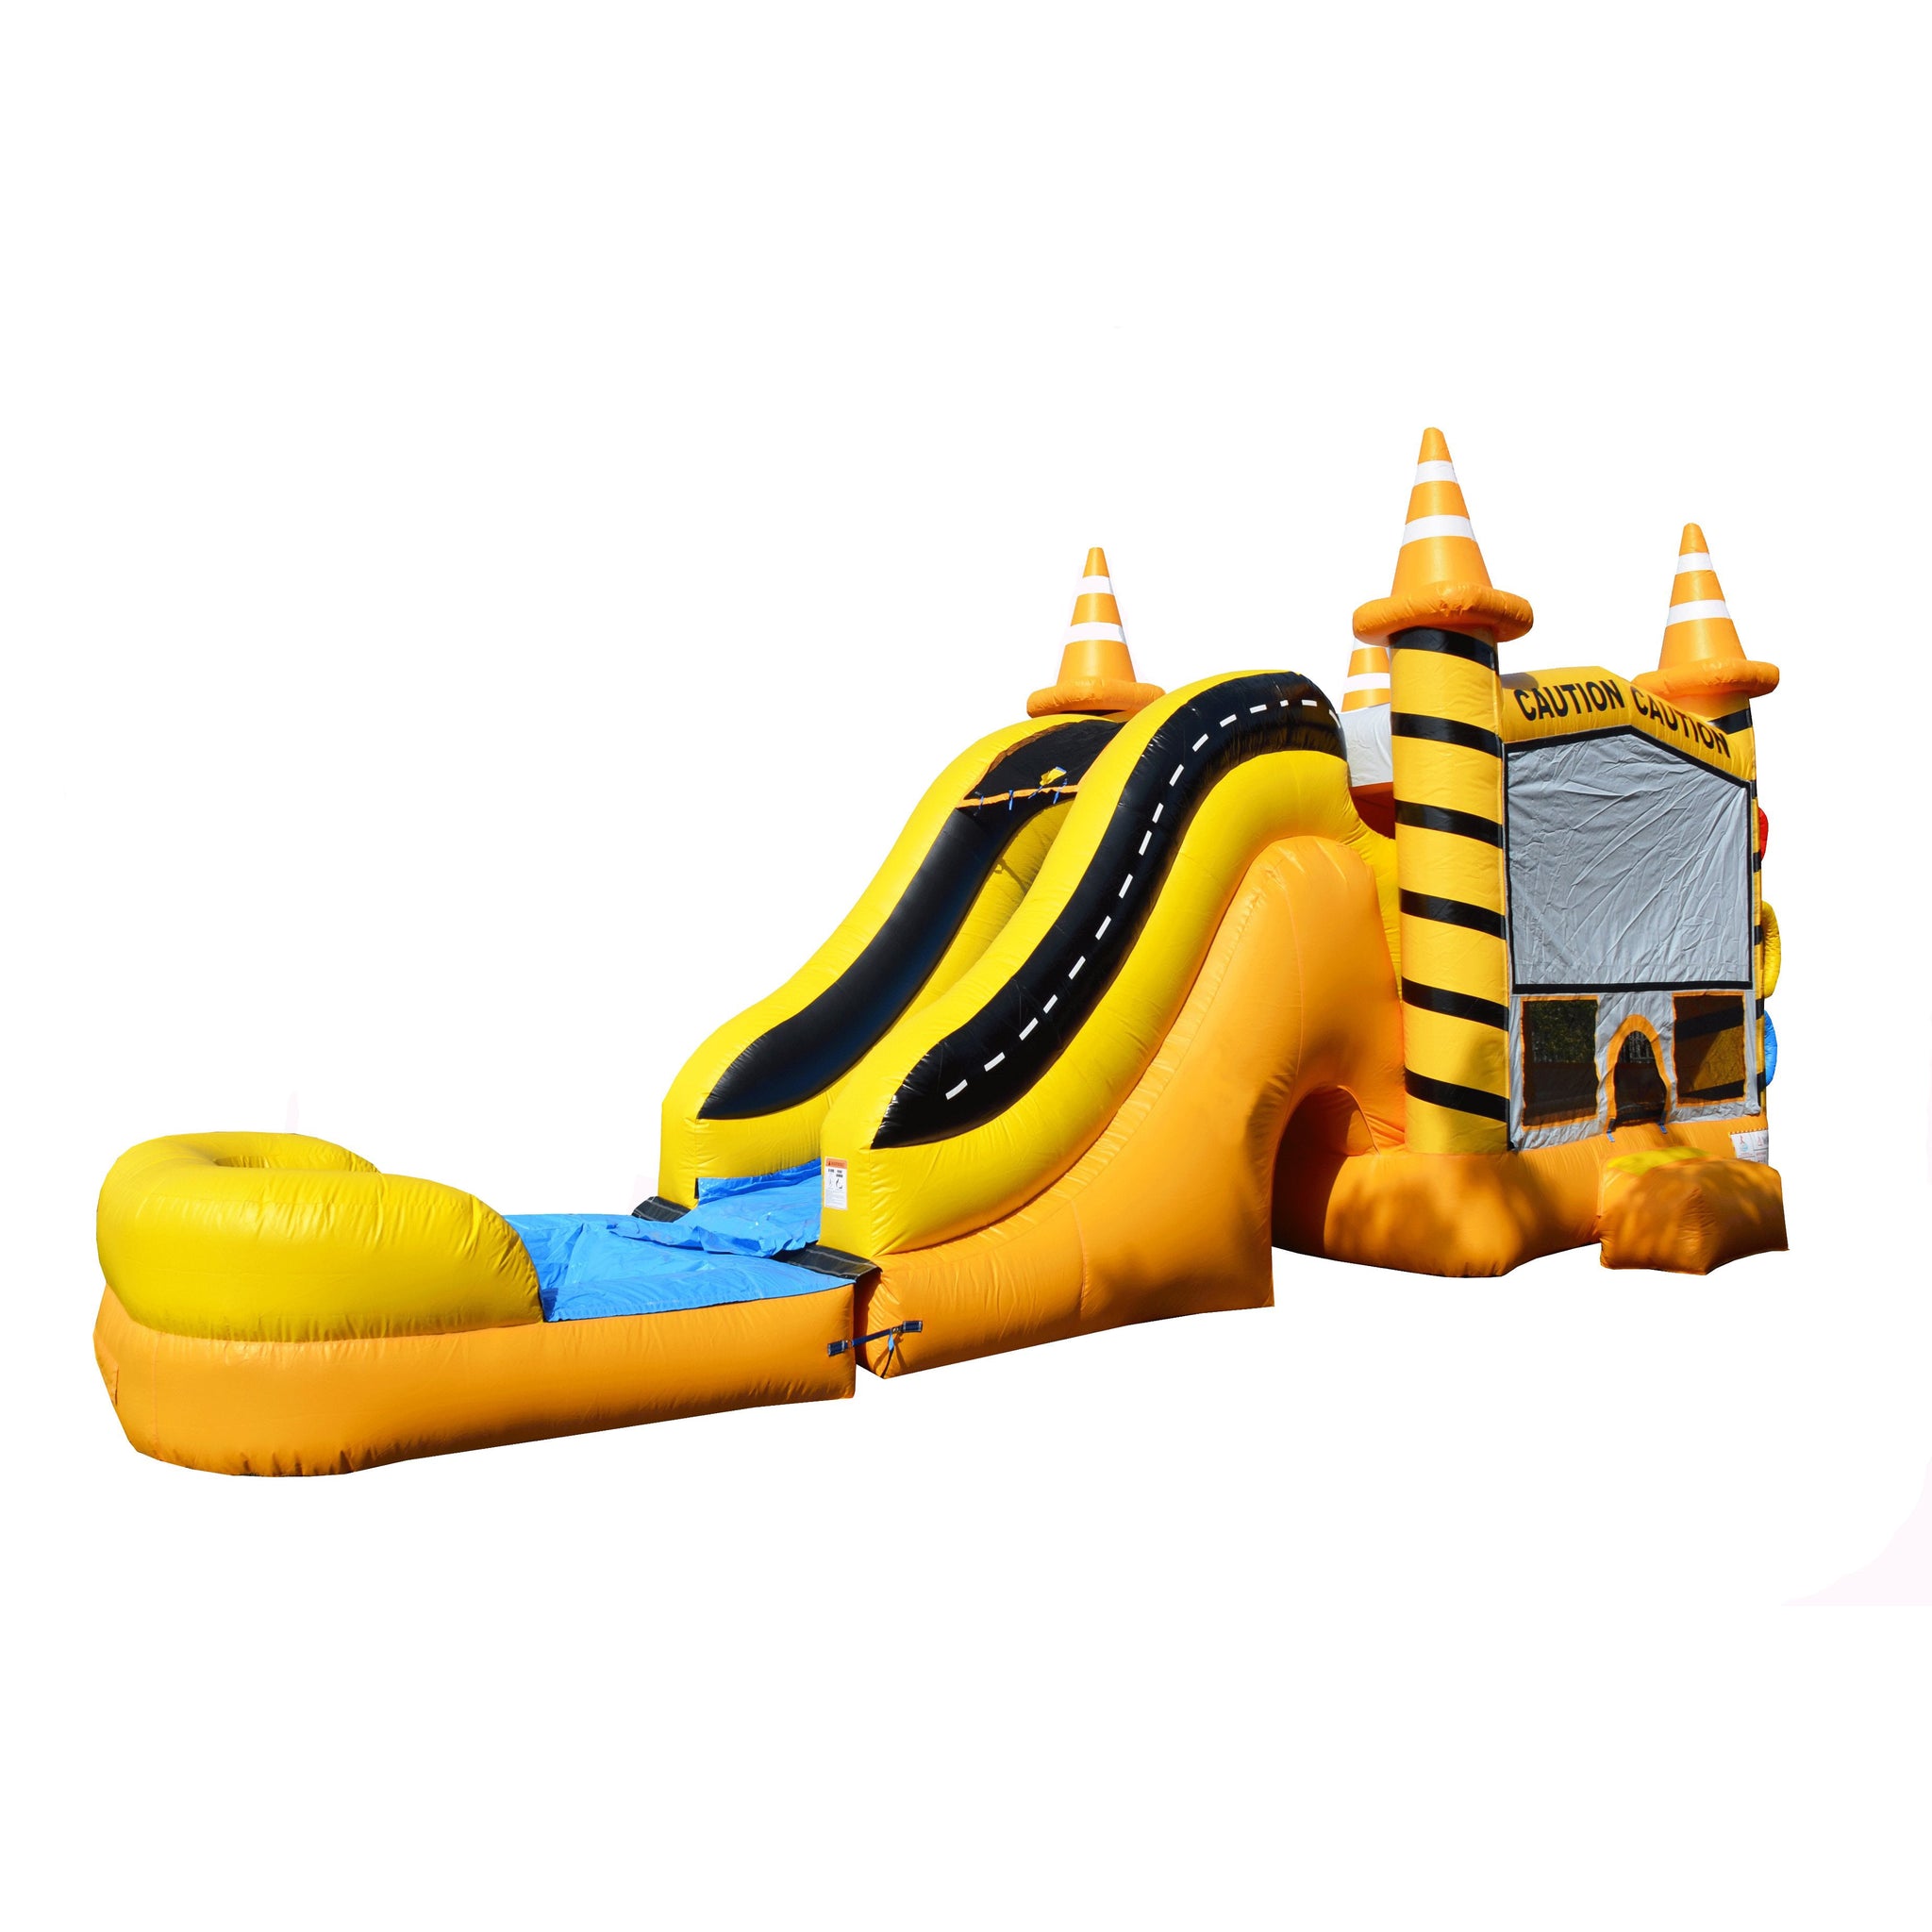 Construction Bounce House Slides Combo Outdoor Bouncy Castle Commercial Inflatables Fun Party